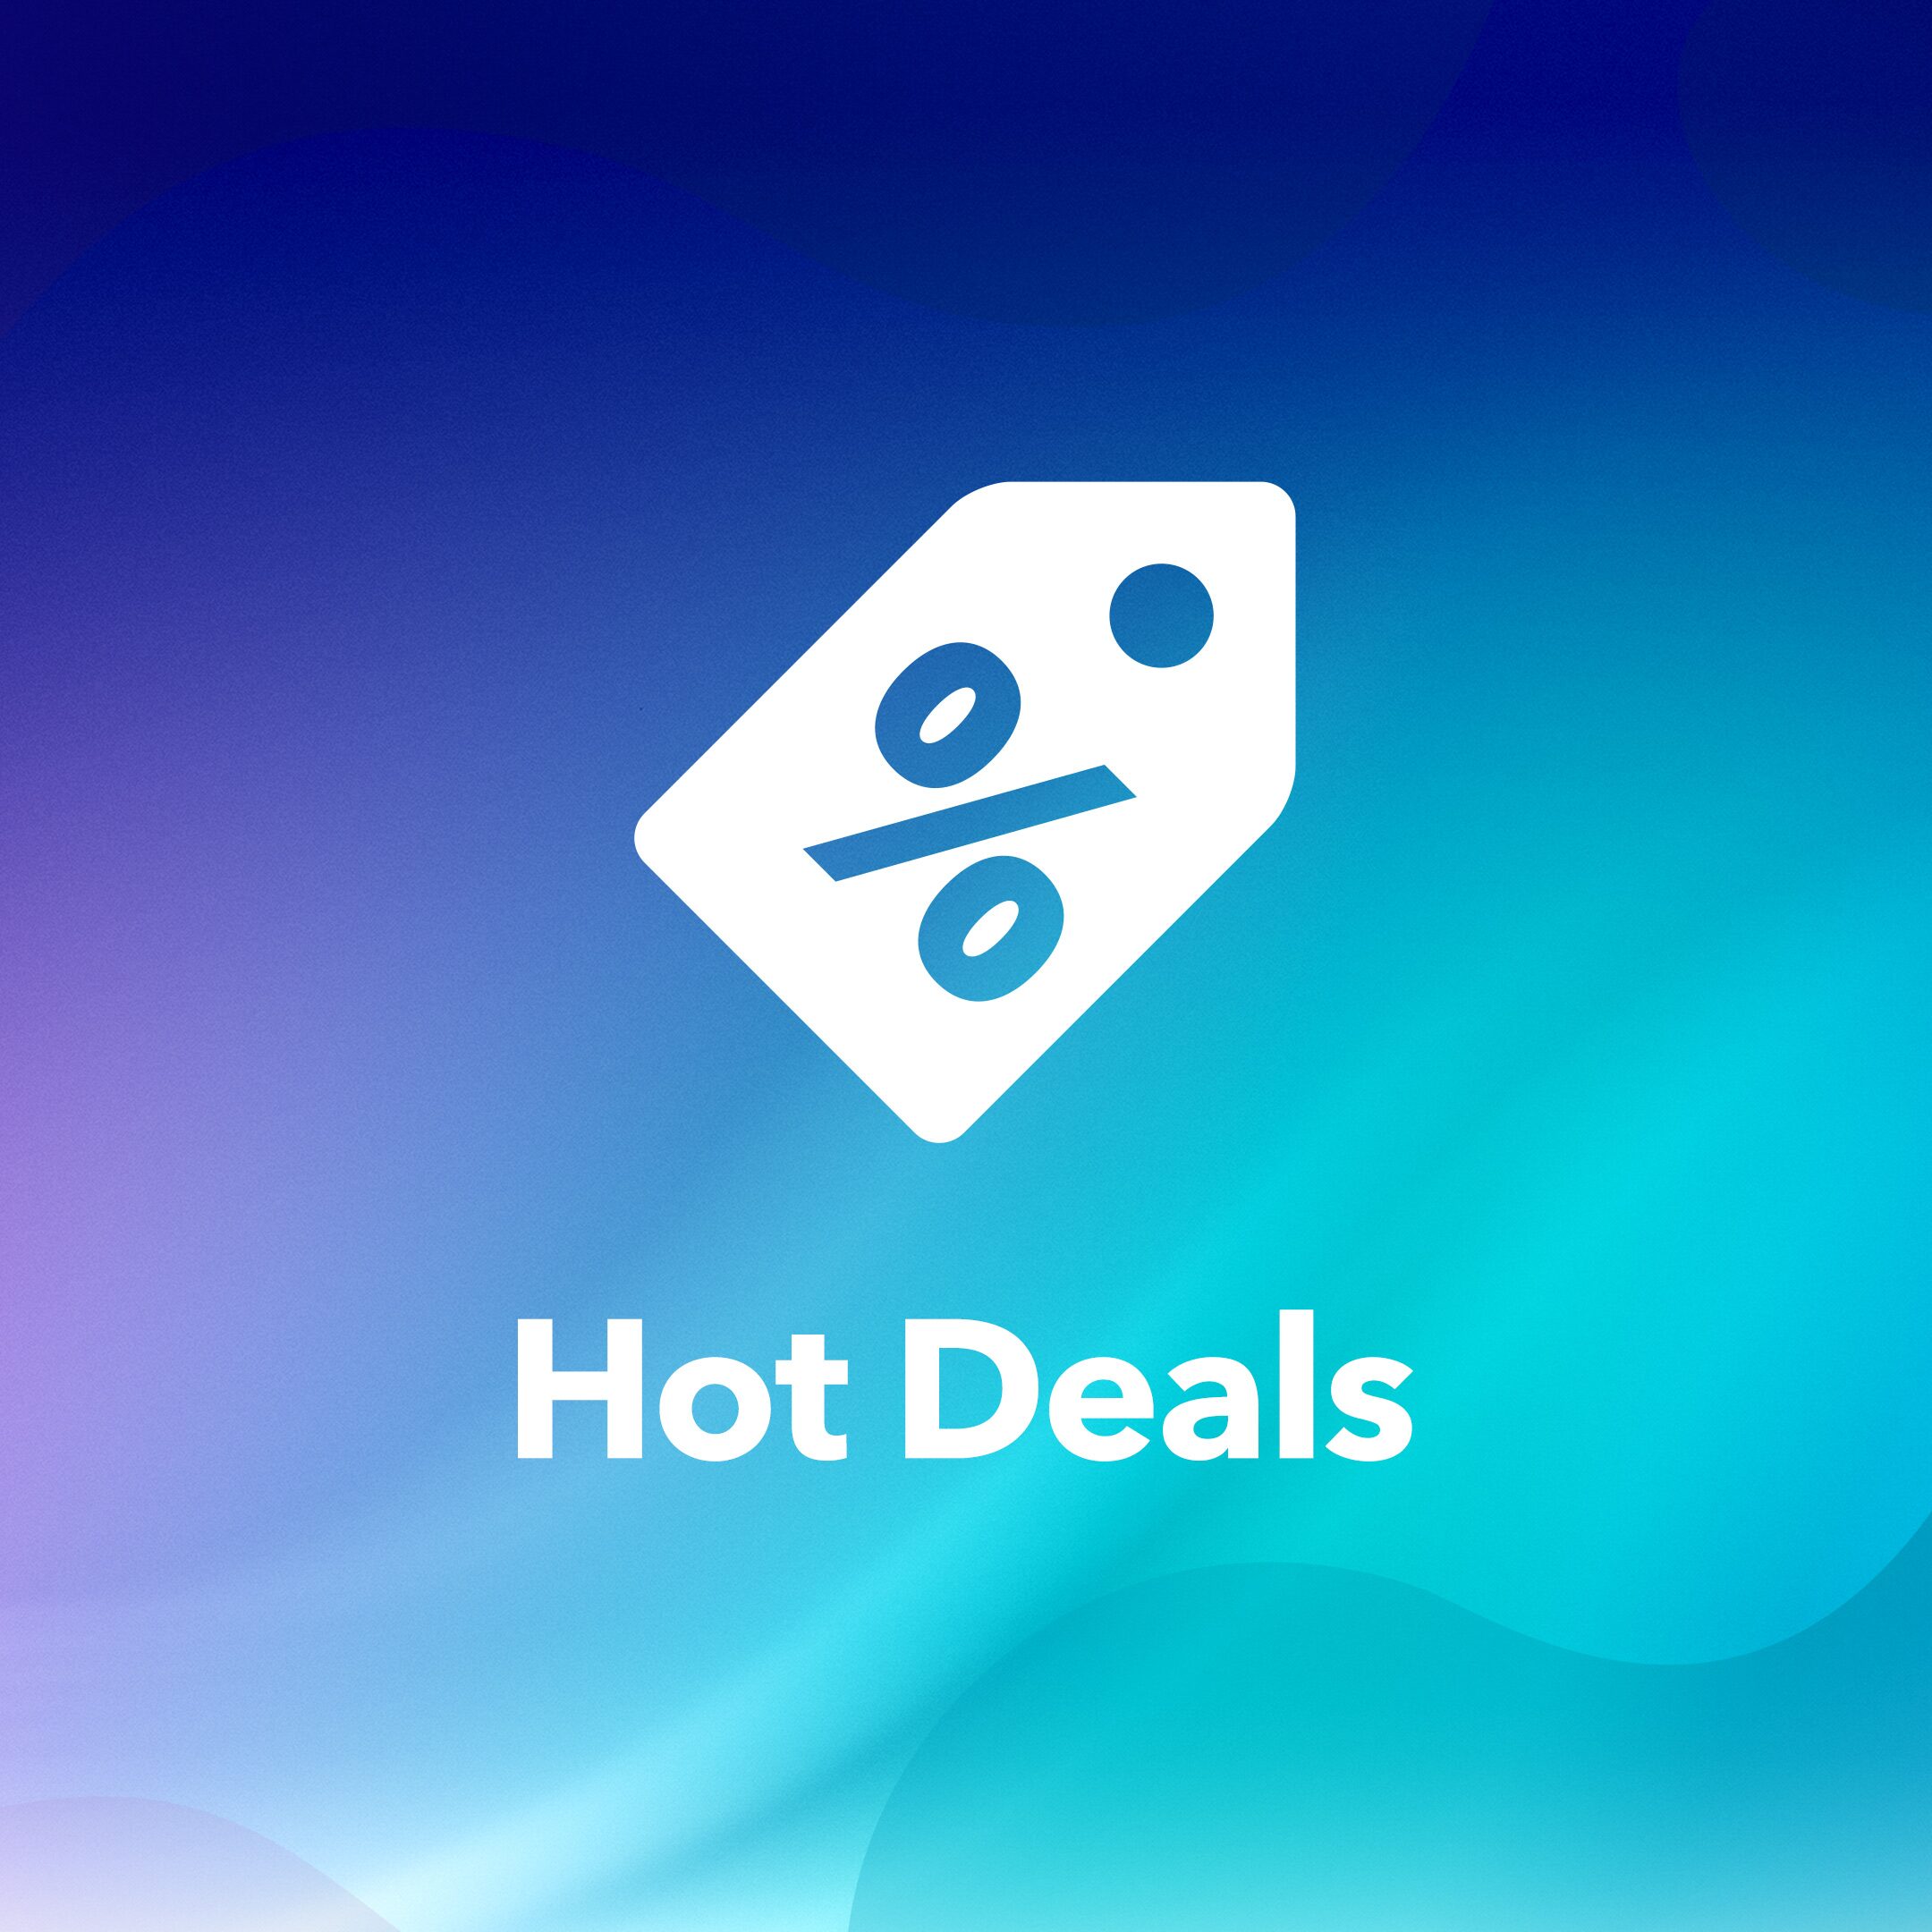 Deals  Official PlayStation™Store US